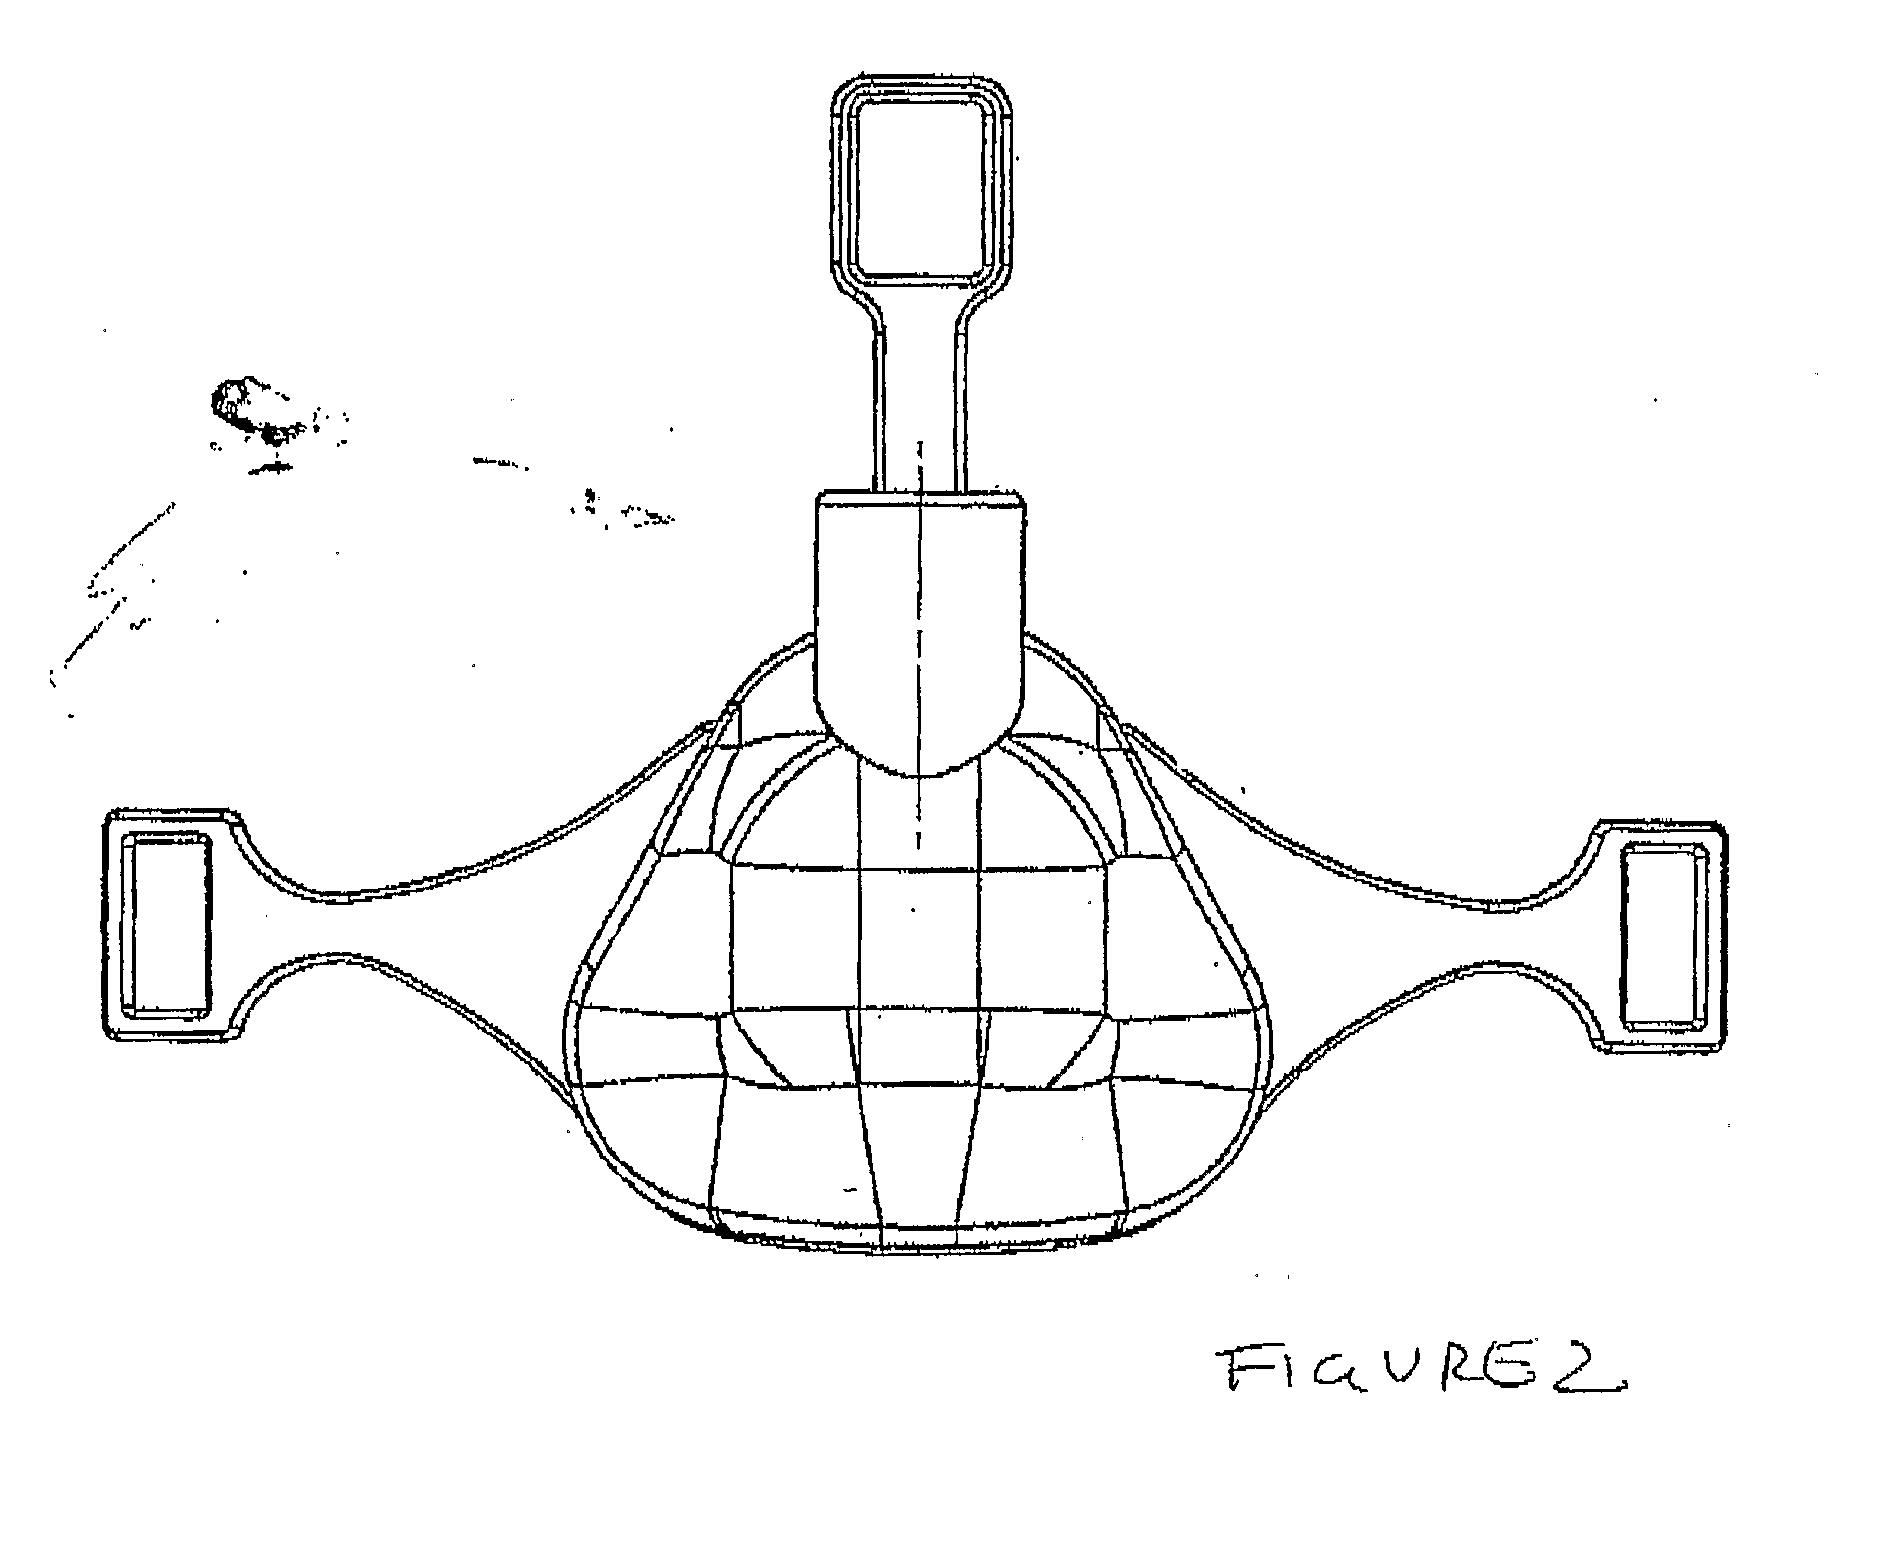 Gas mask assembly with swivel connector